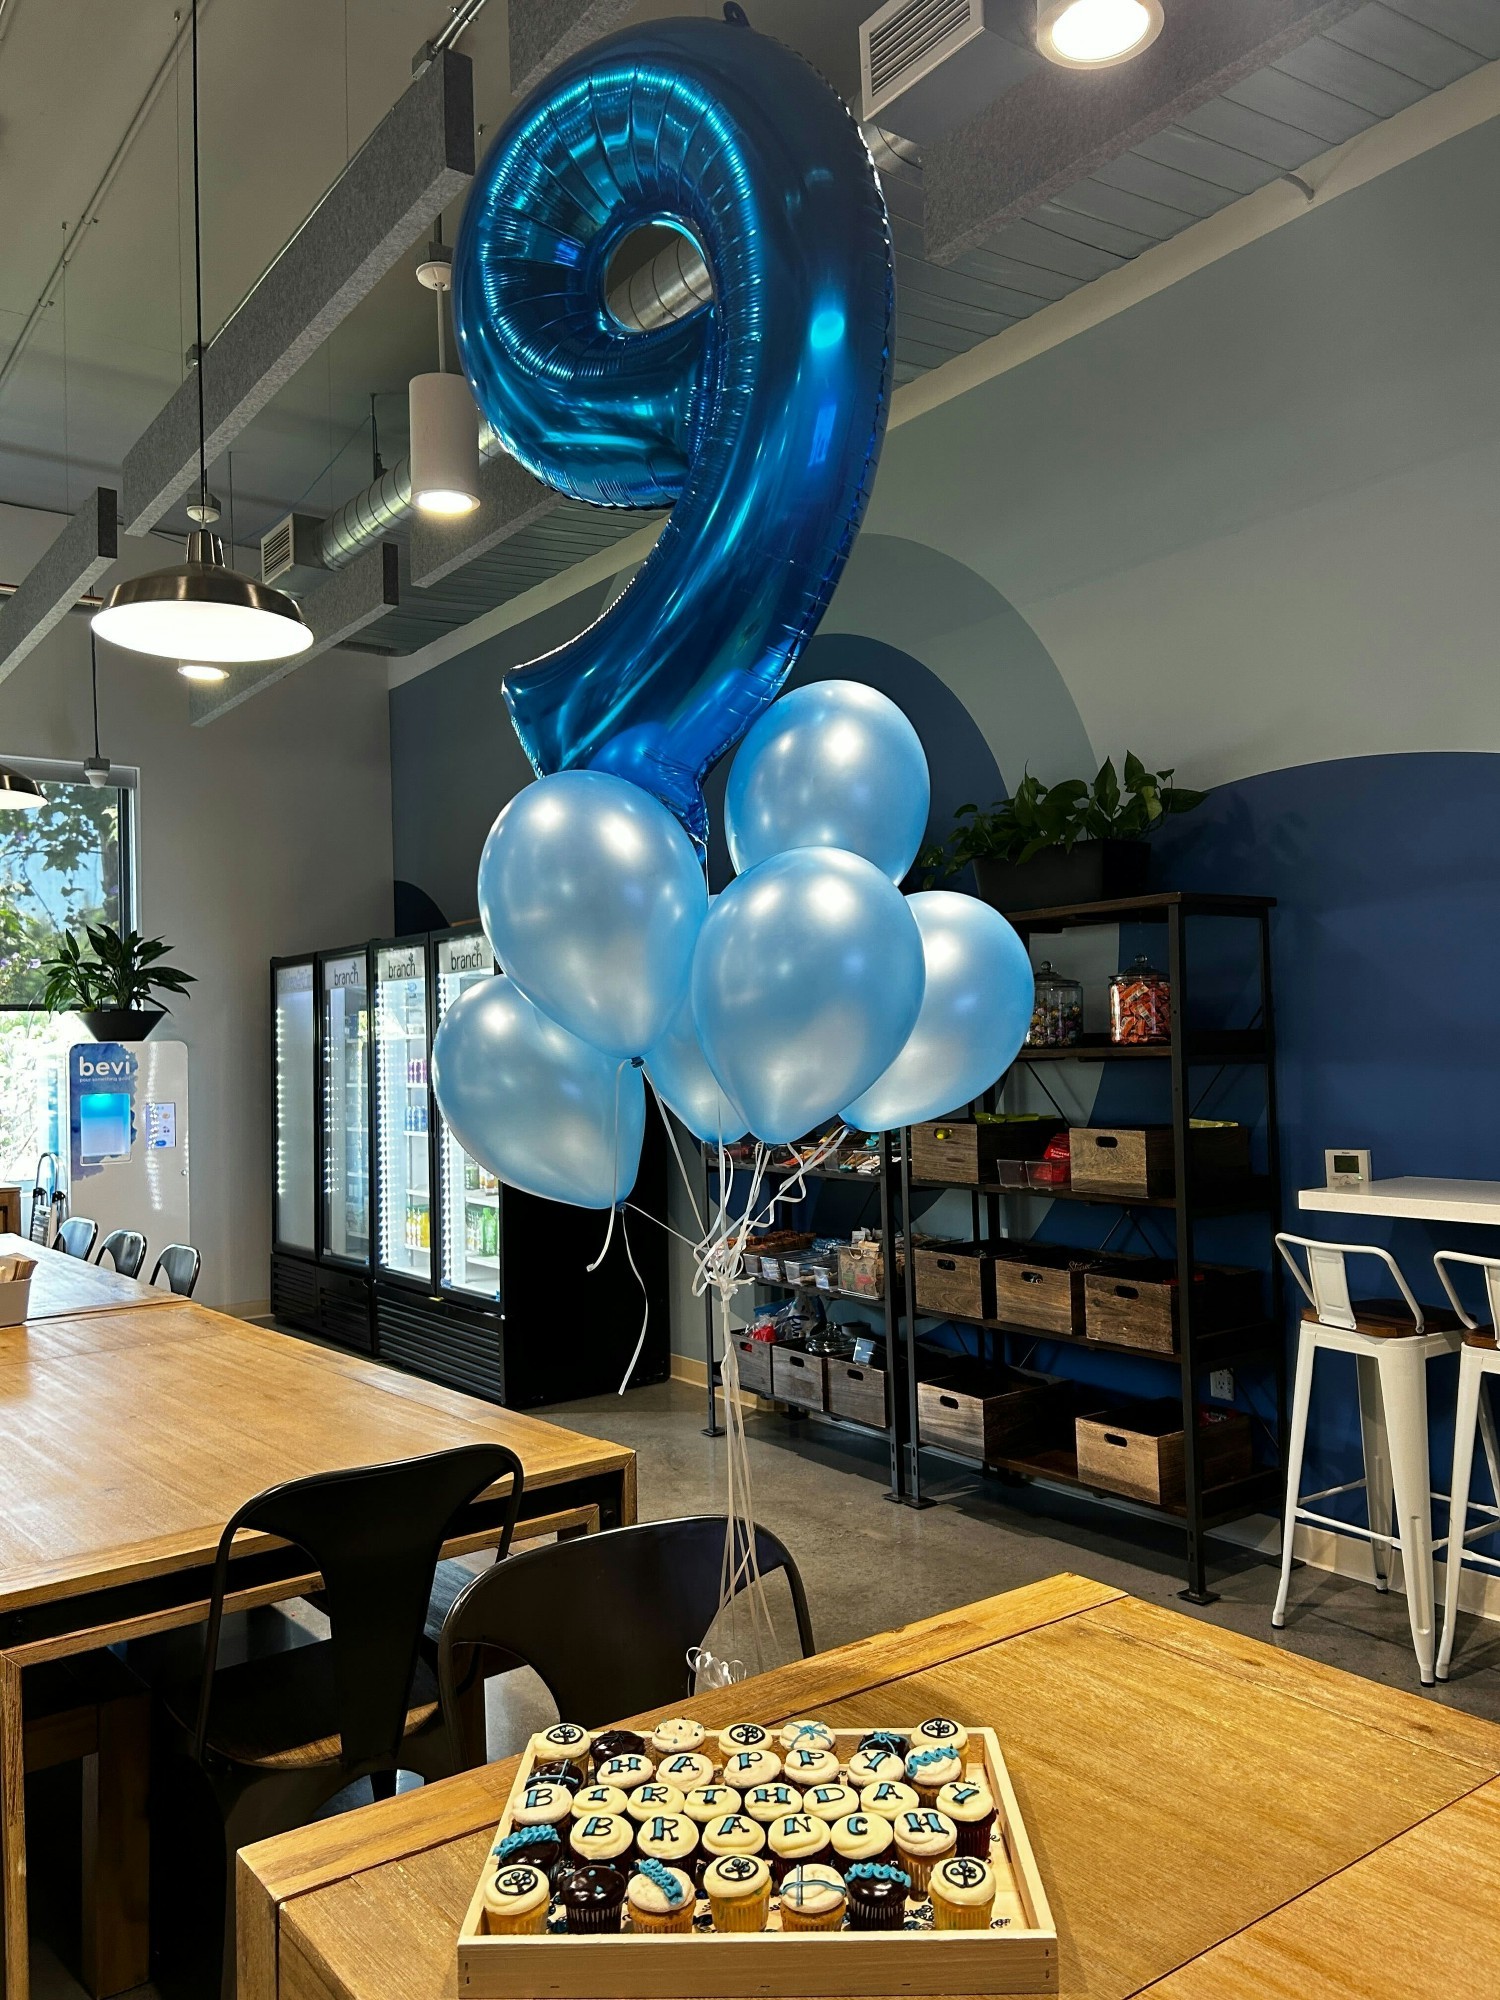 Celebrating 9 years of Branch at the Palo Alto Office